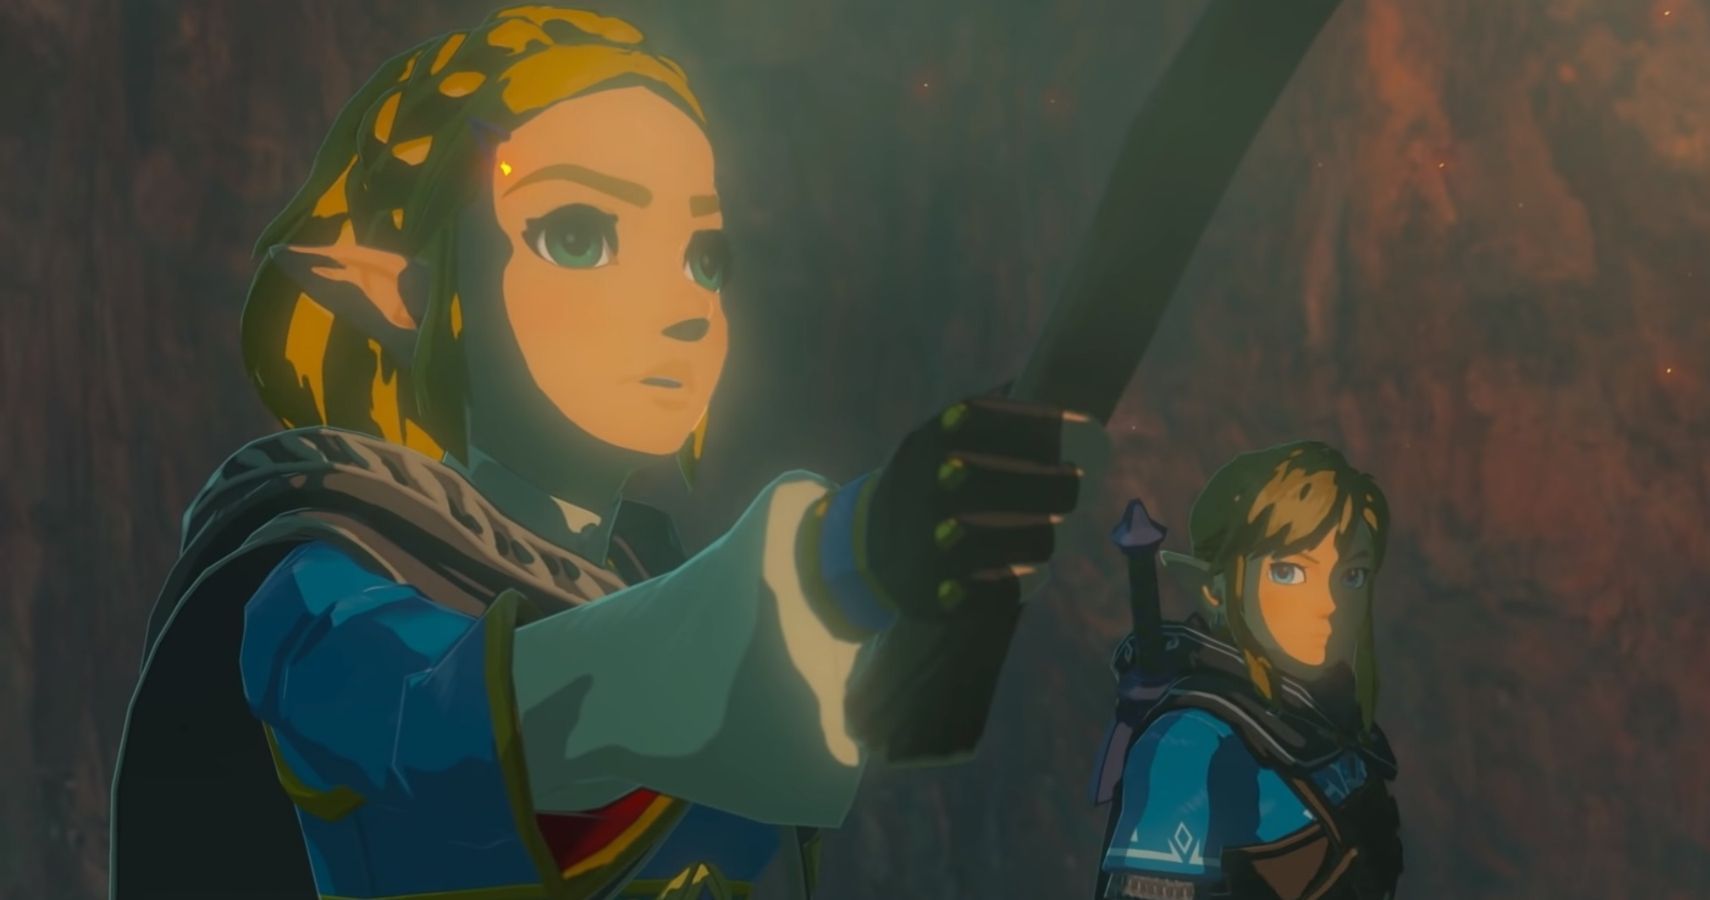 Zelda stands in front of Link. Both have blonde hair and wear blue clothing. They appear to be travelling.